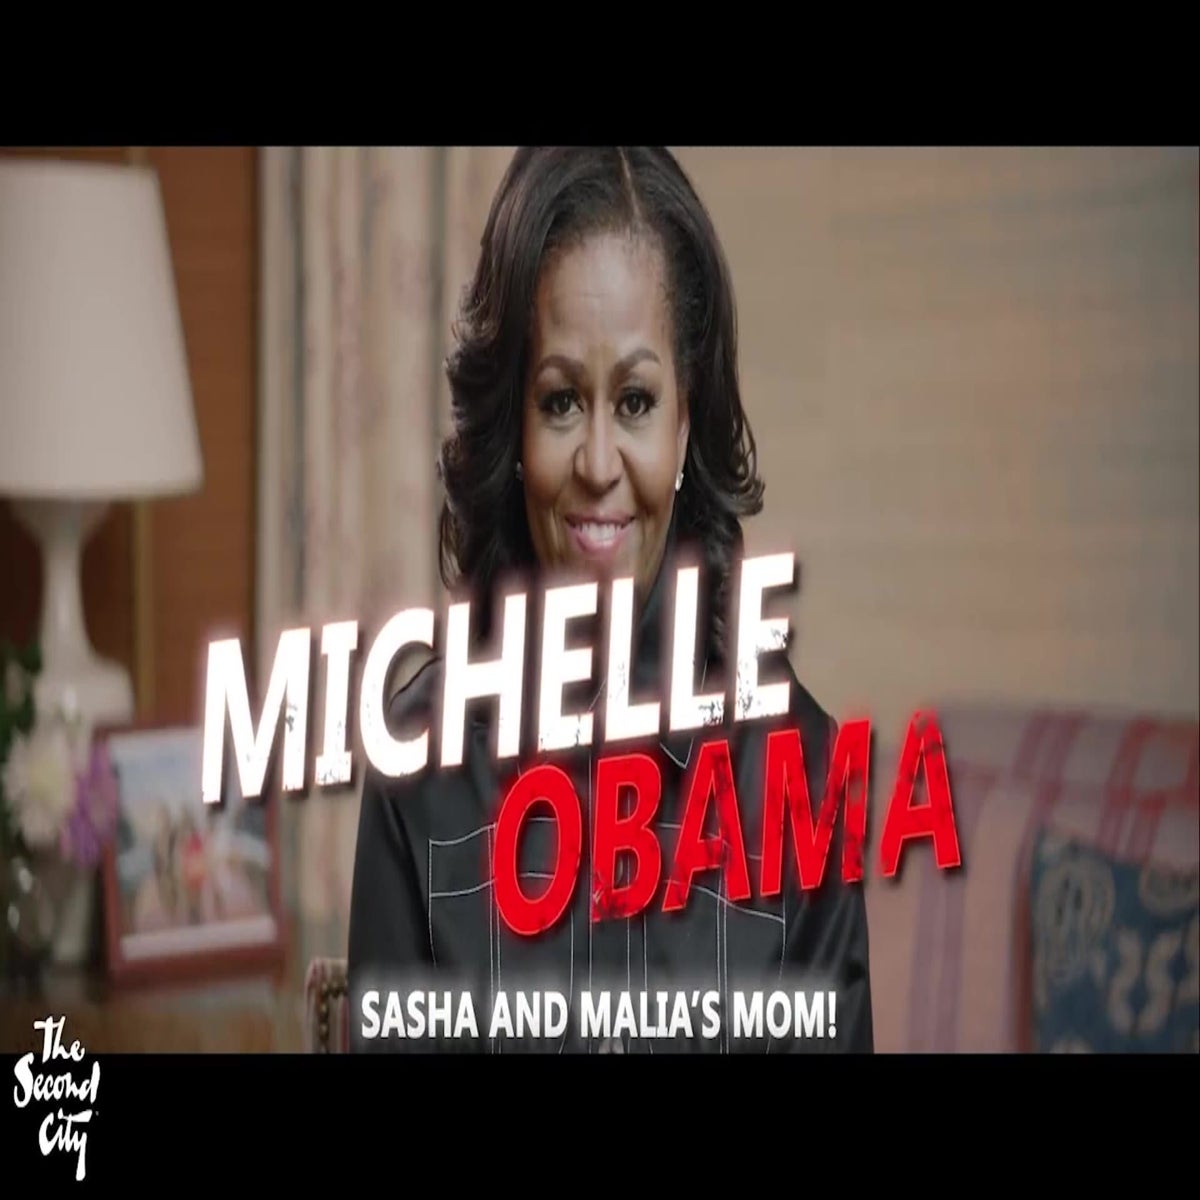 Michelle Obama joins famous mothers in vaccine PSA | Lifestyle |  Independent TV